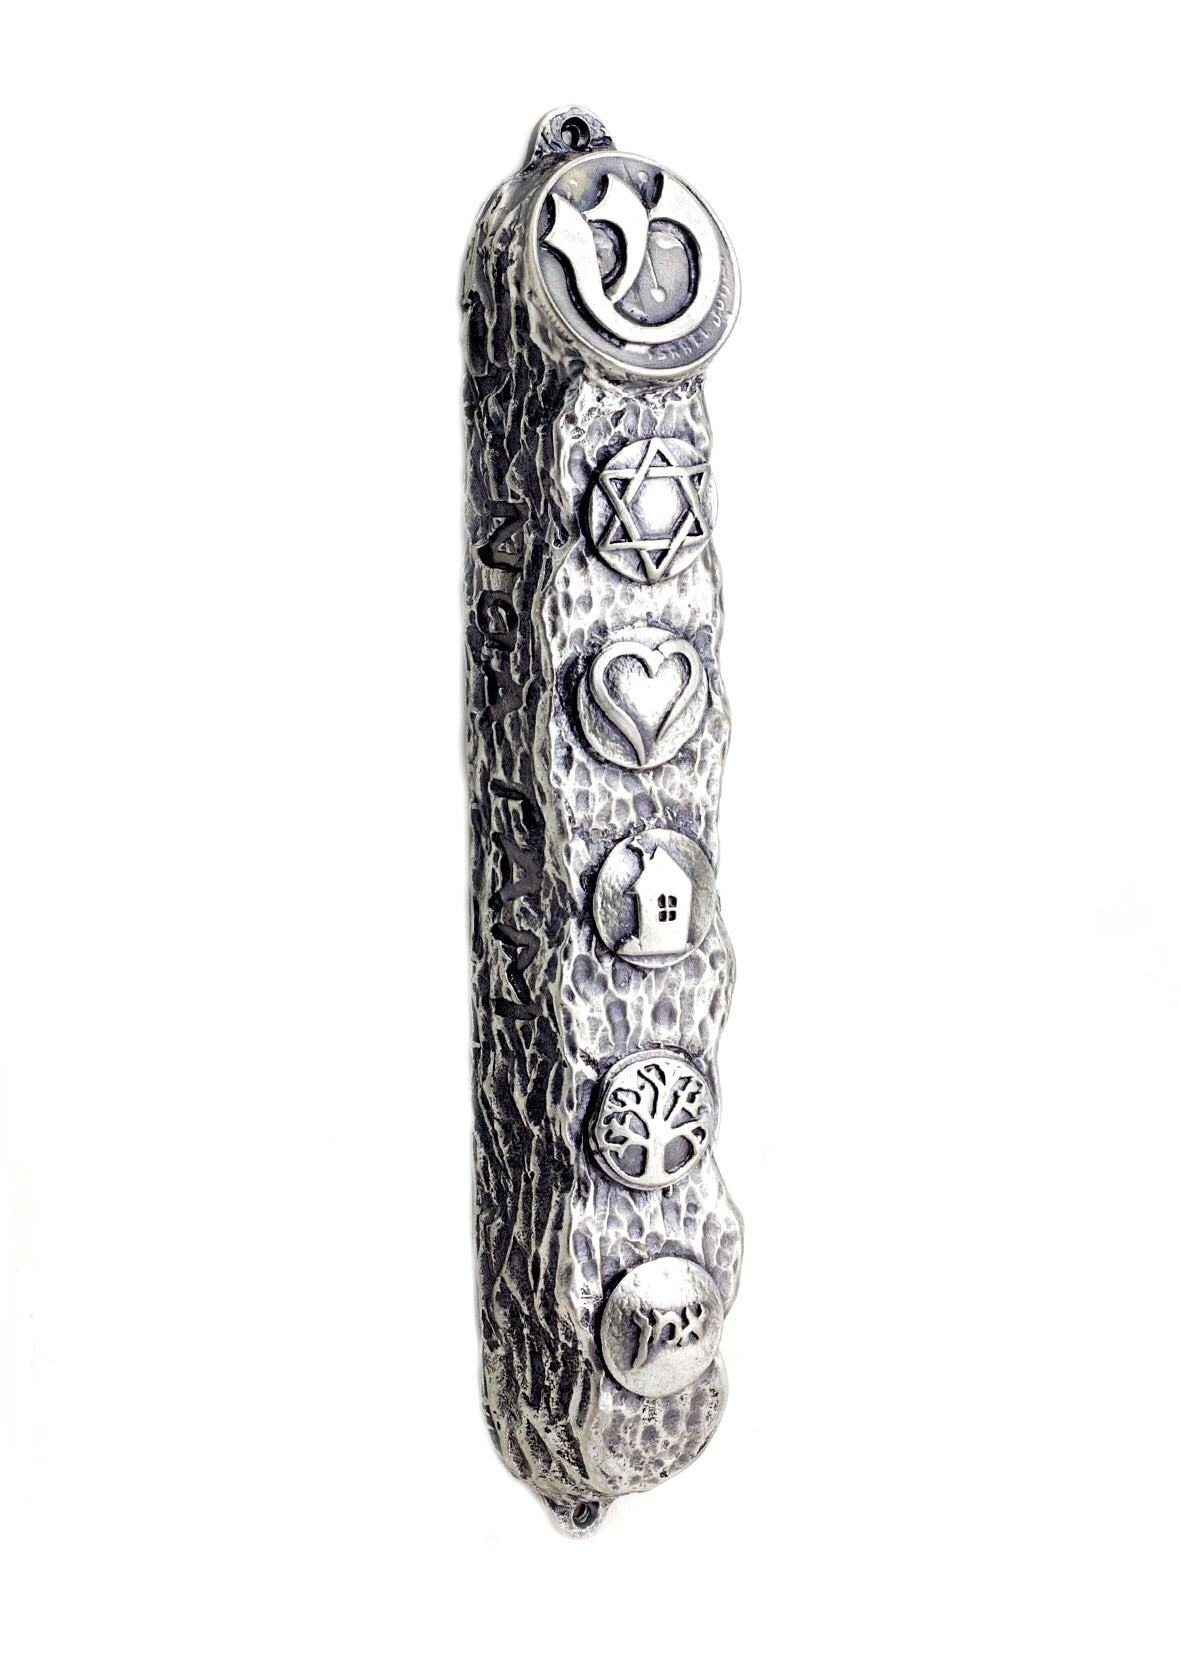 Silver Mezuzah Case, Silver Mezuzah with Scroll for Door, Ornate Mezuzah, Intricate Royal Mezzuzahs, Judaica Gifts for Home 16cm / 6.3Inch